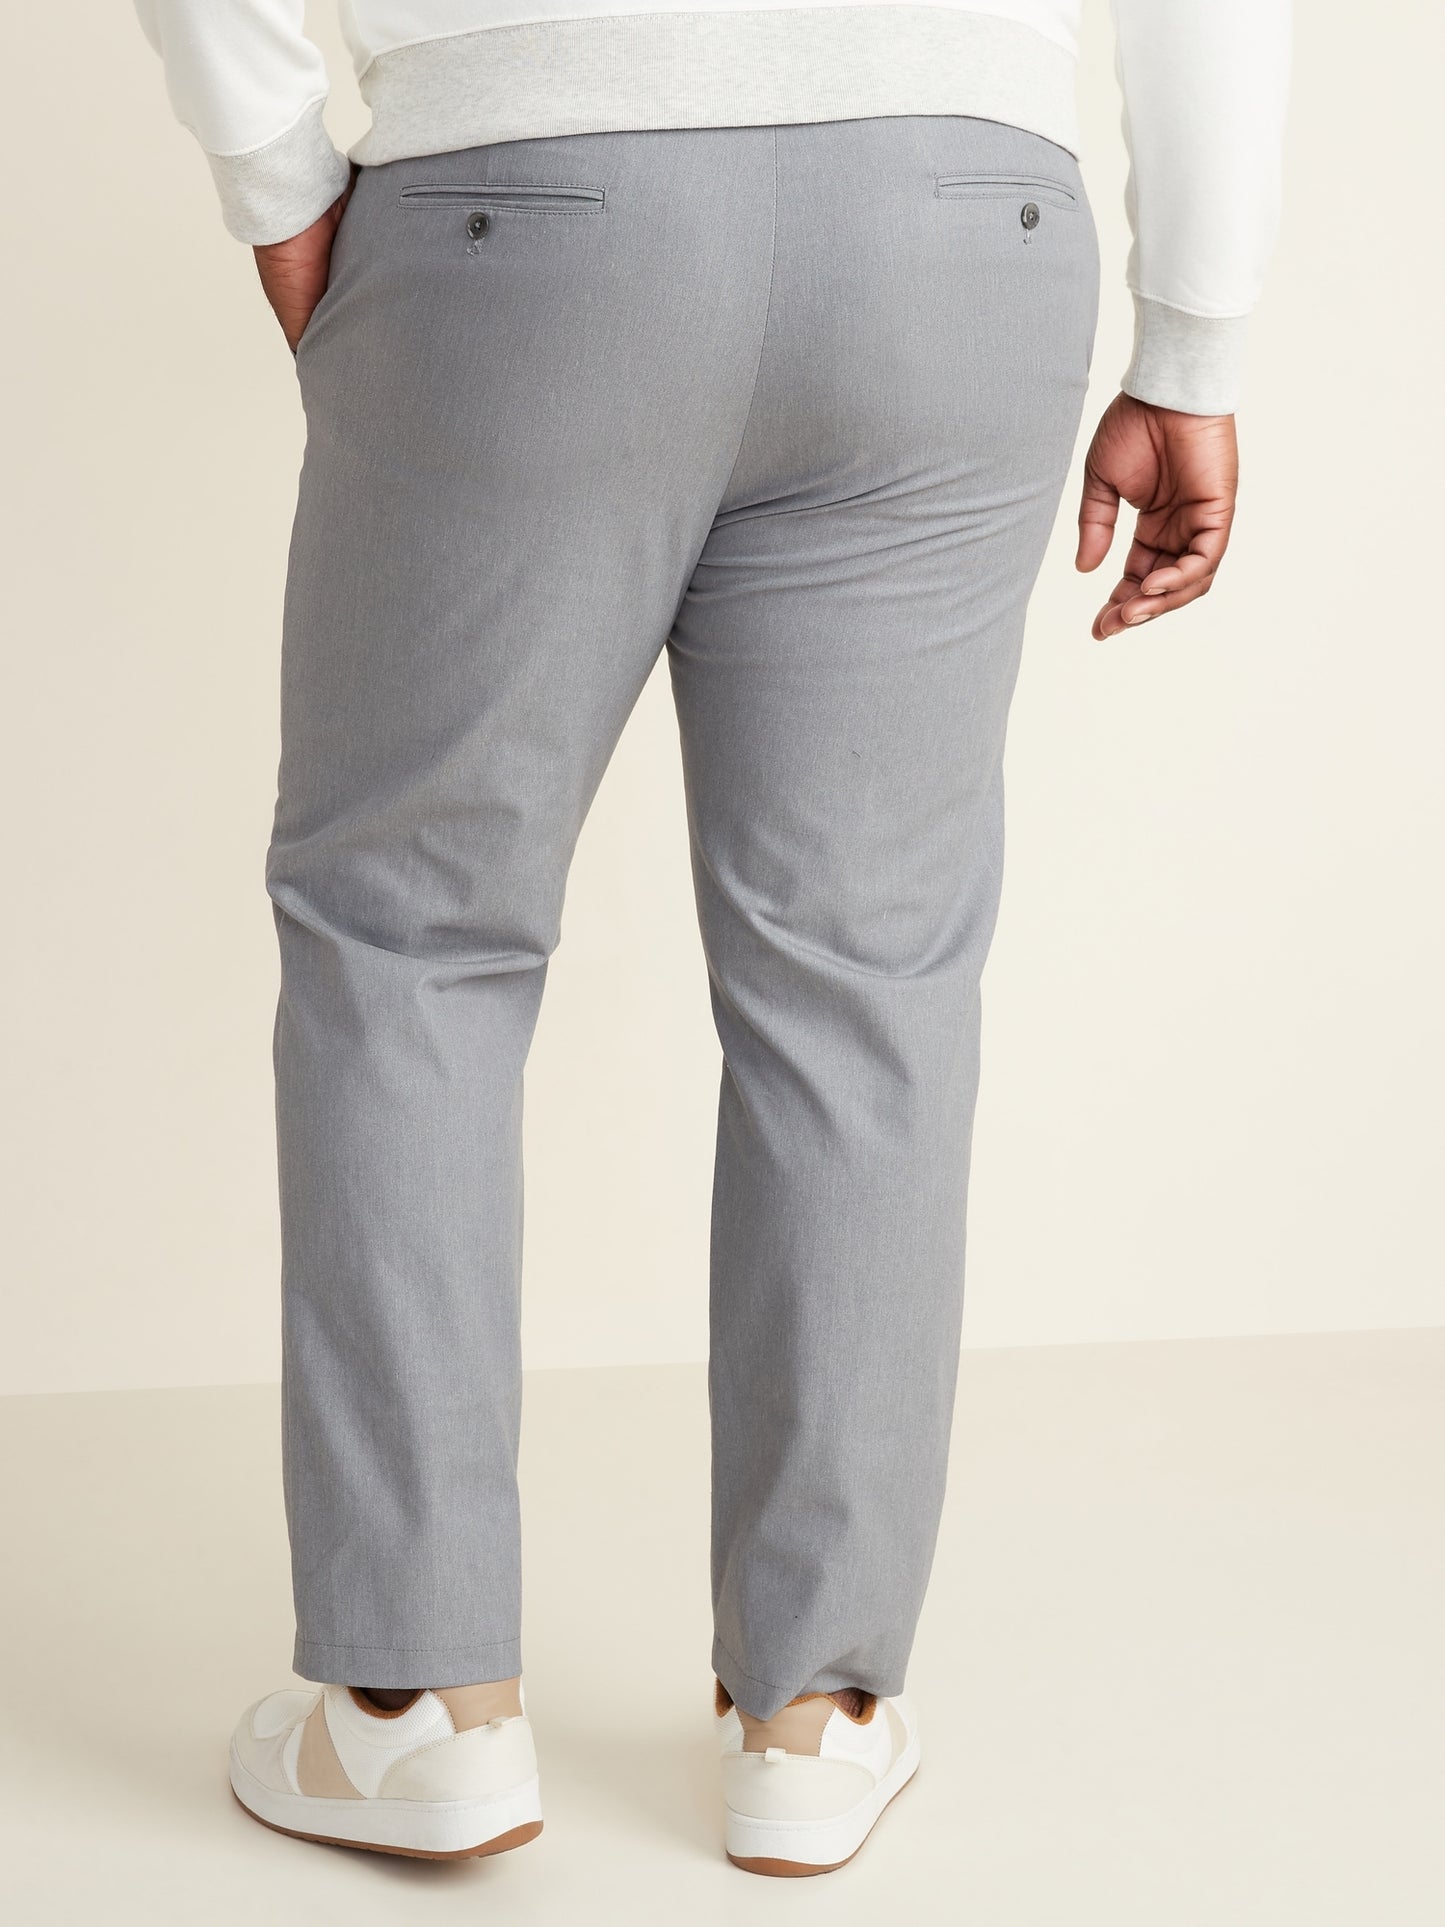 ON All-New Slim Ultimate Built-In Flex Textured Chinos for Men - Light Gris